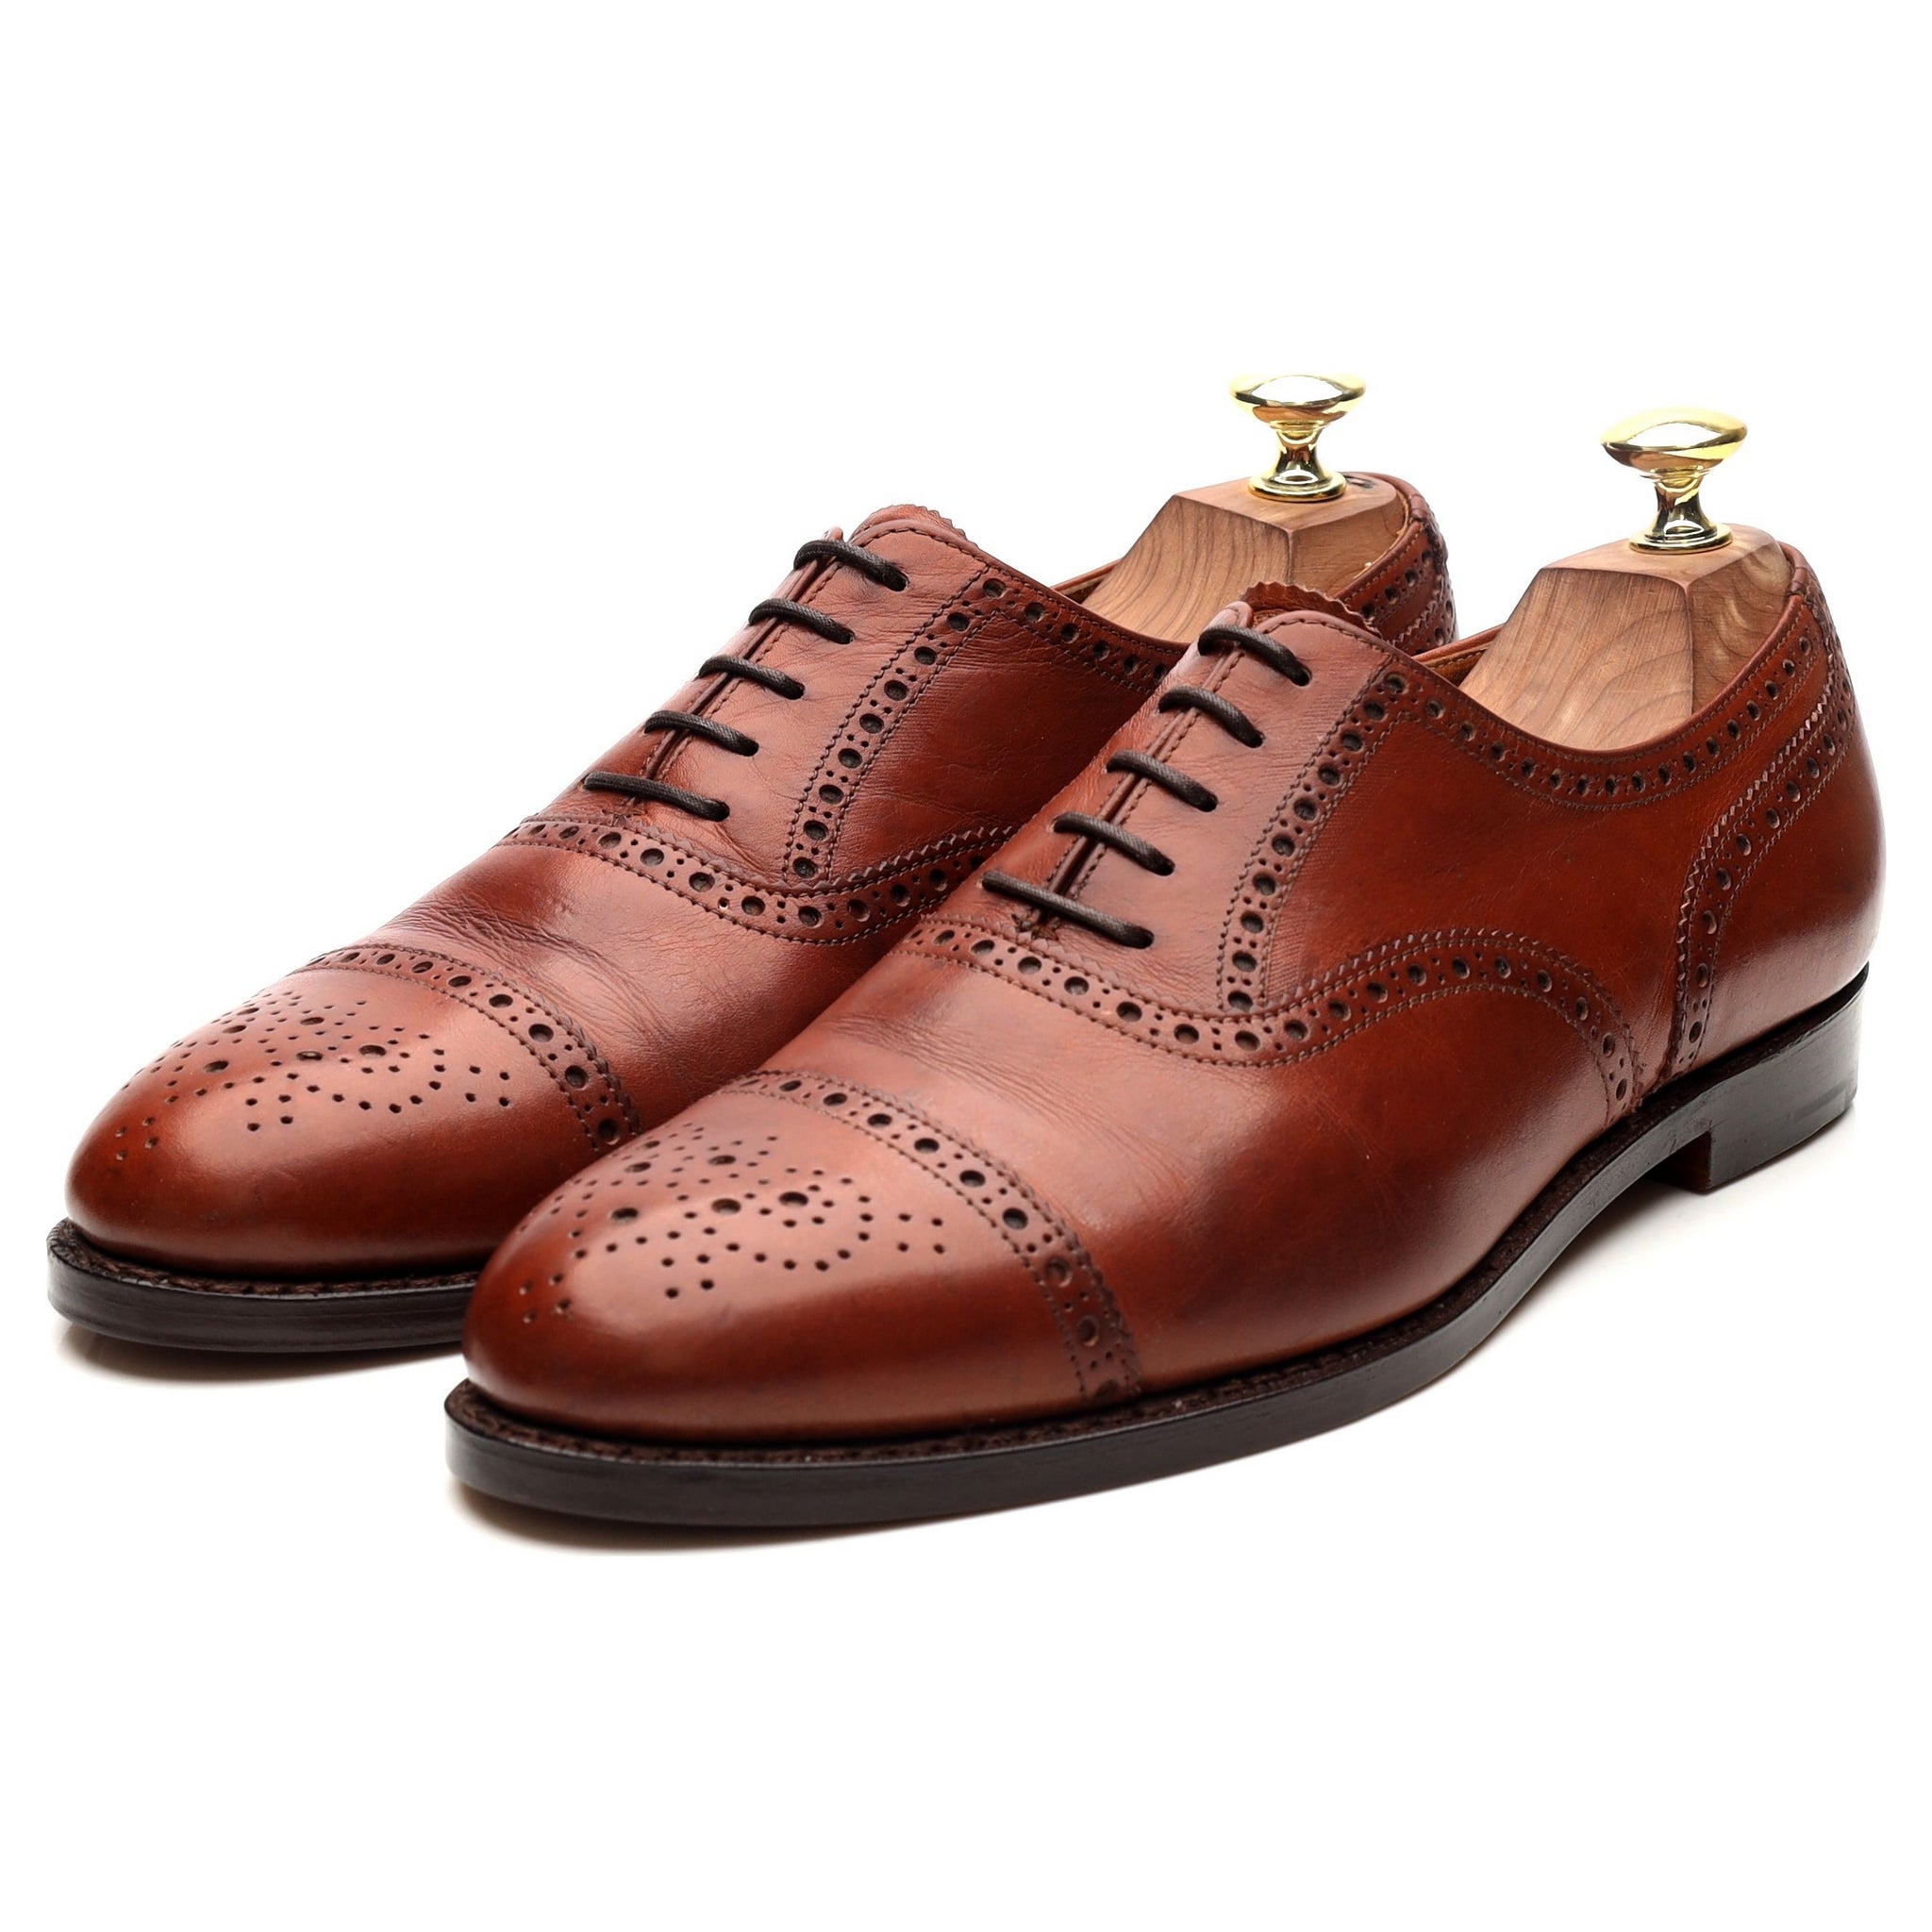 Westminster' Tan Brown Leather Oxford Semi Brogues UK 7.5 E